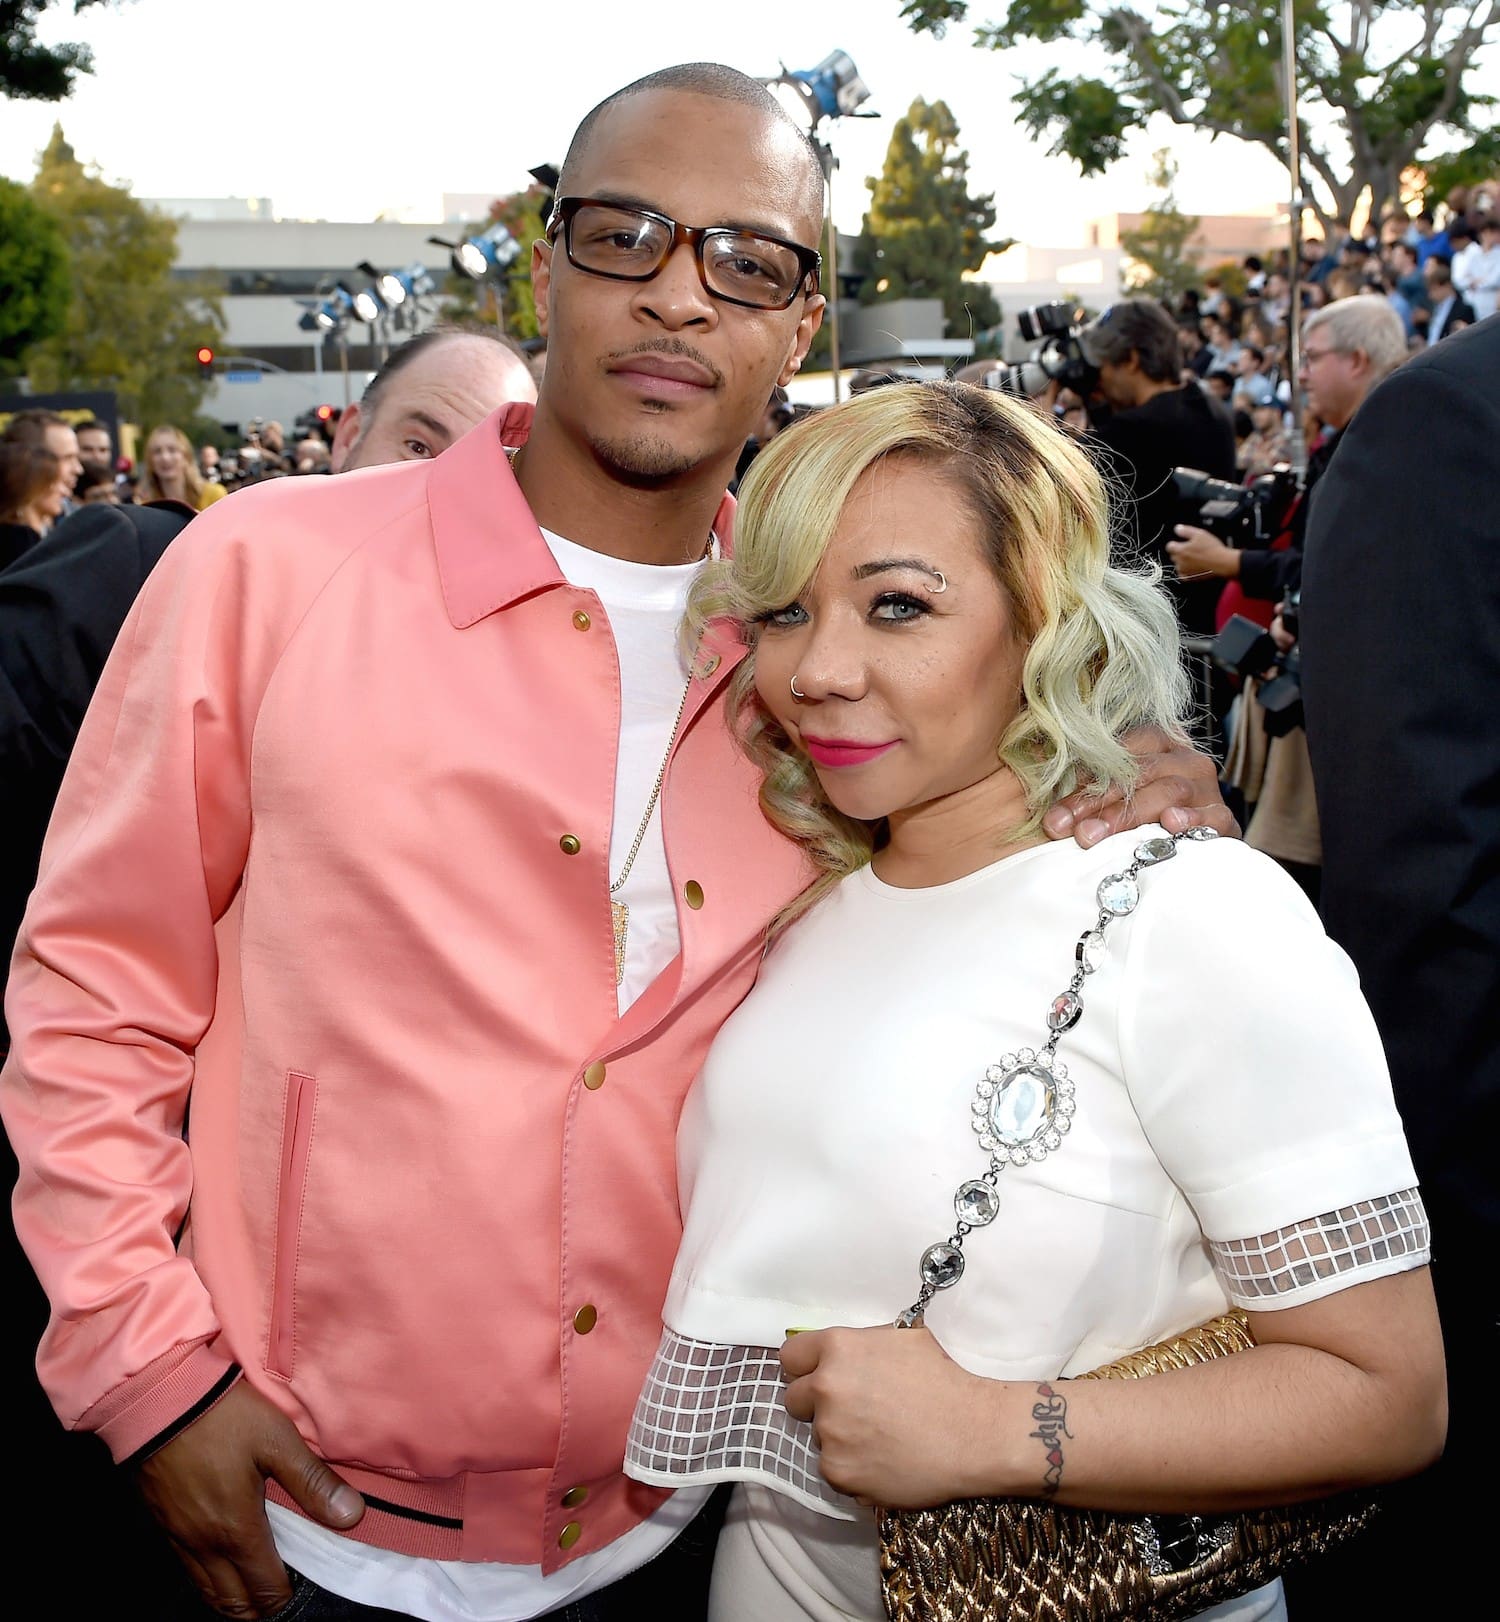 Tiny Harris Has A Special Kind Of Love With T.I. - See The Smile He Puts On Her Face